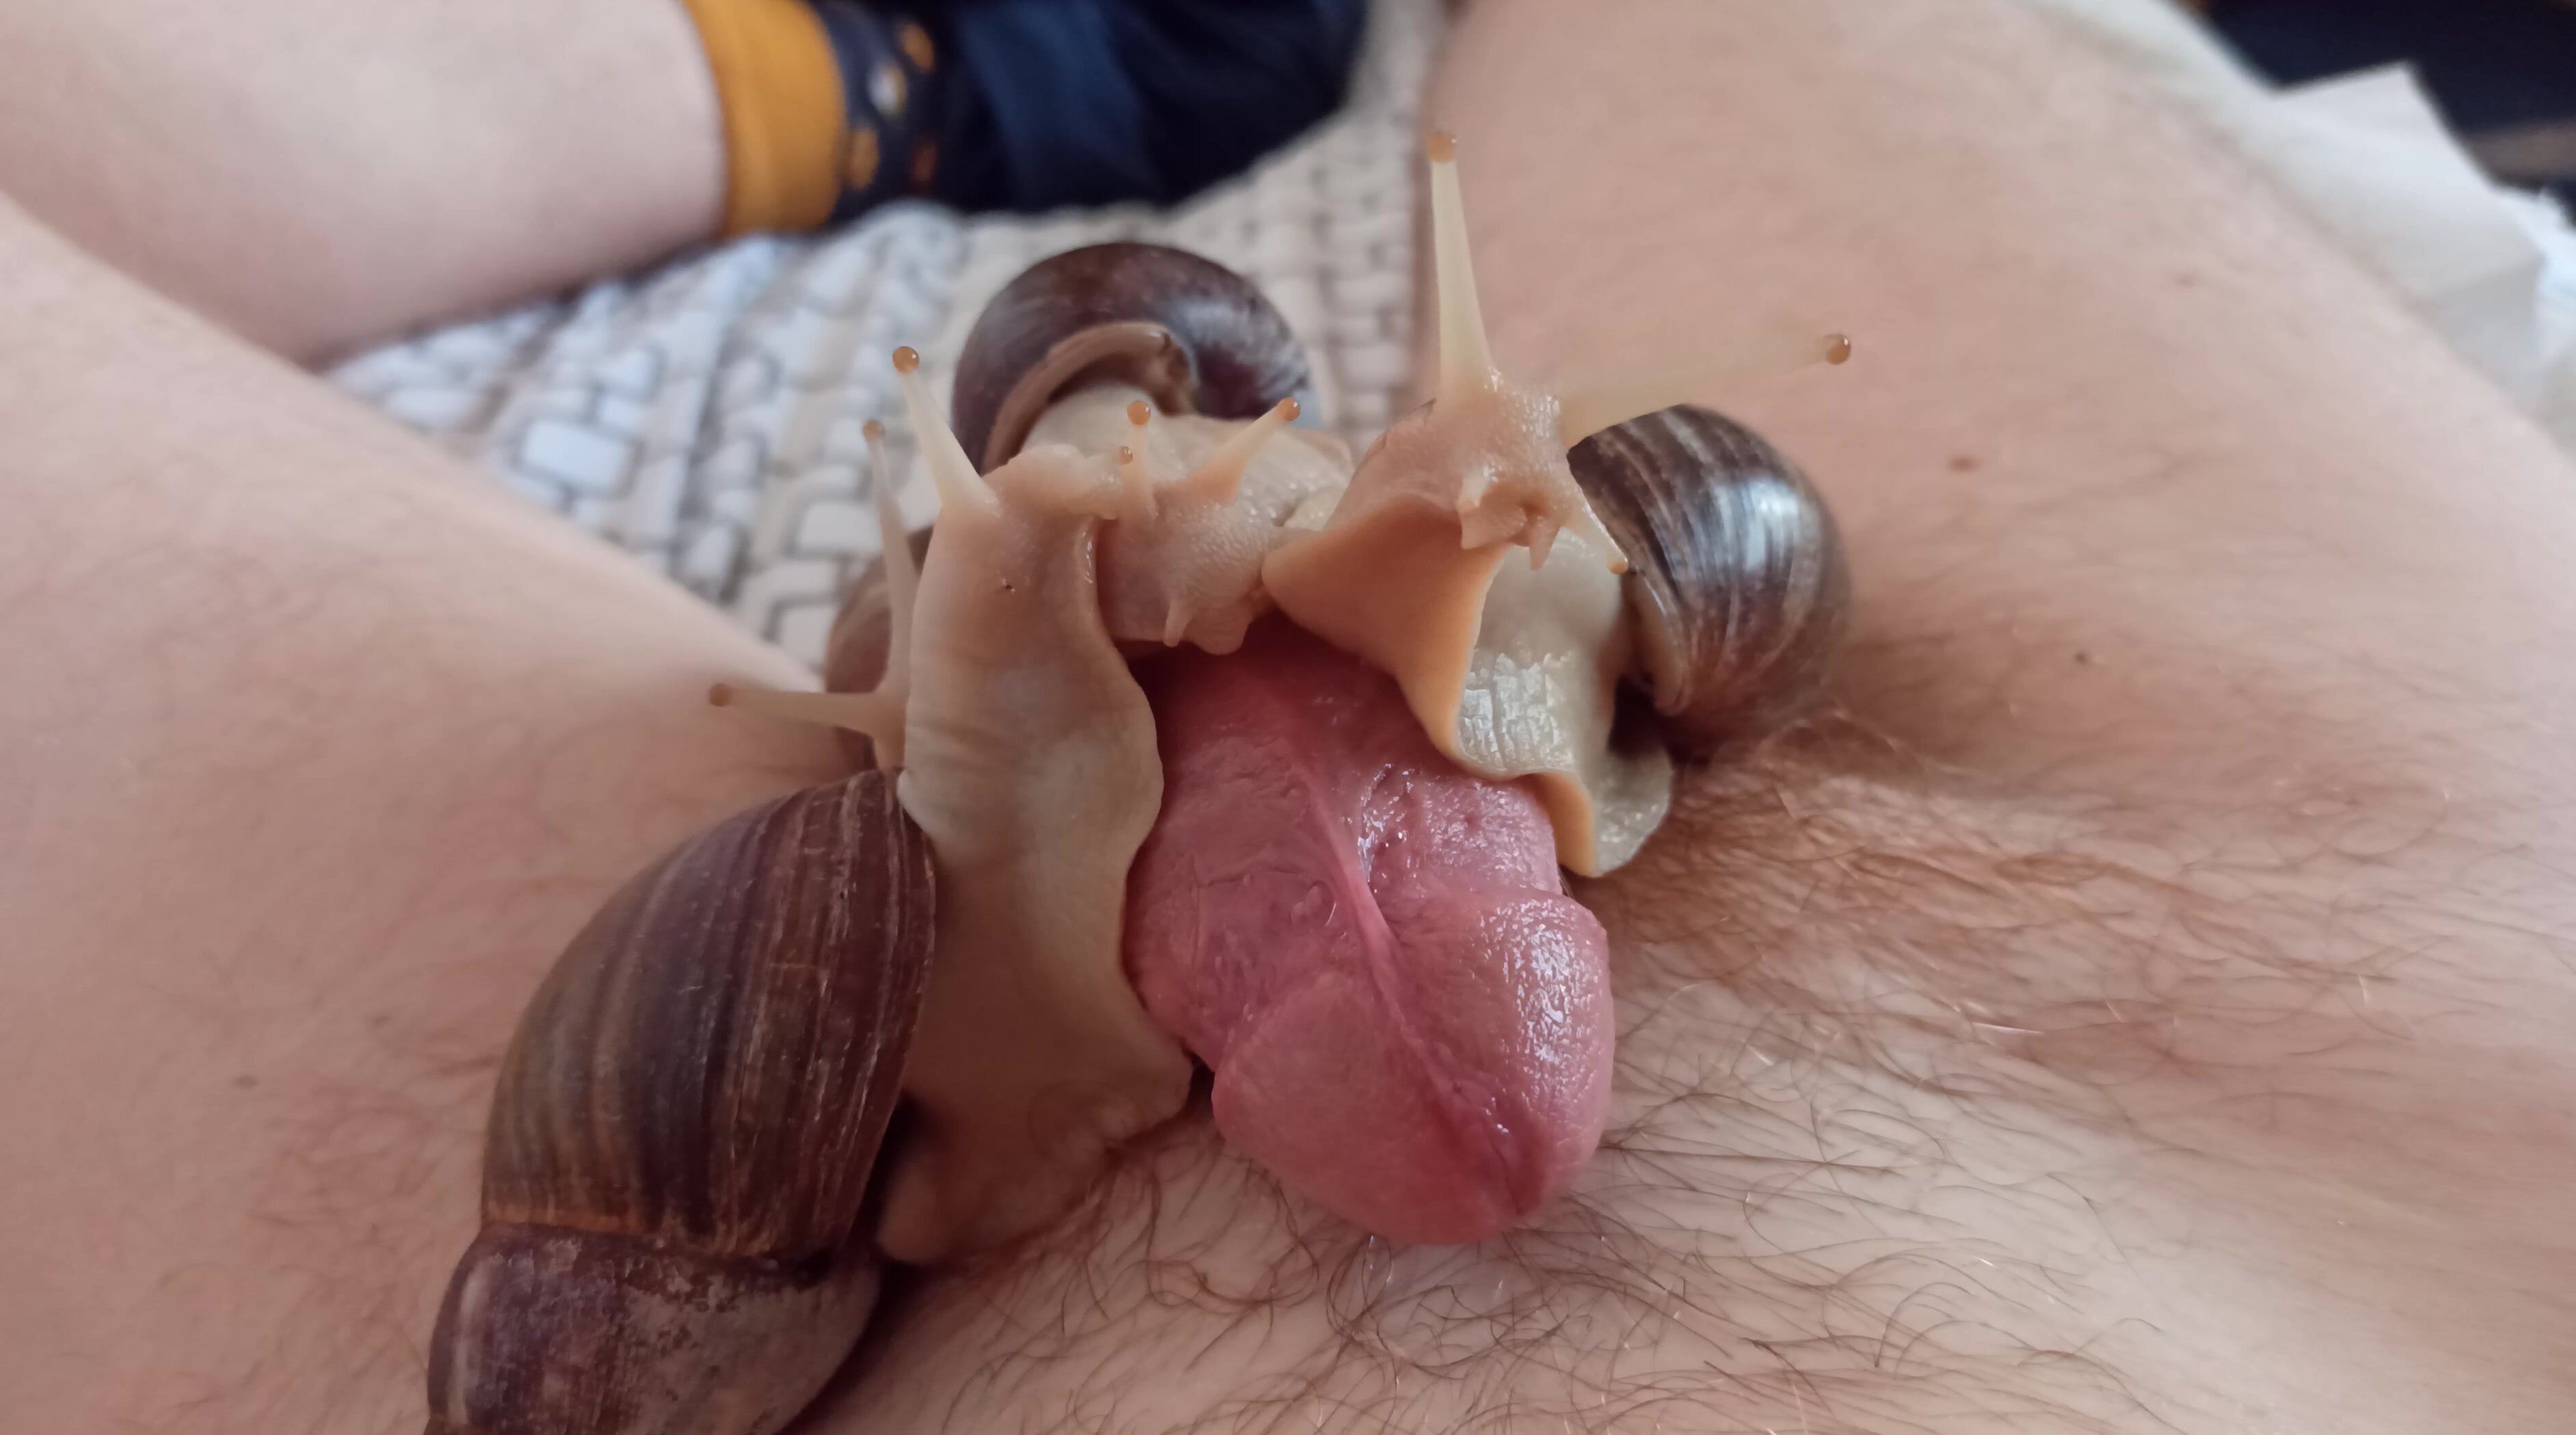 3770px x 2100px - Giant snails almost make me moan with their touch - ThisVid.com